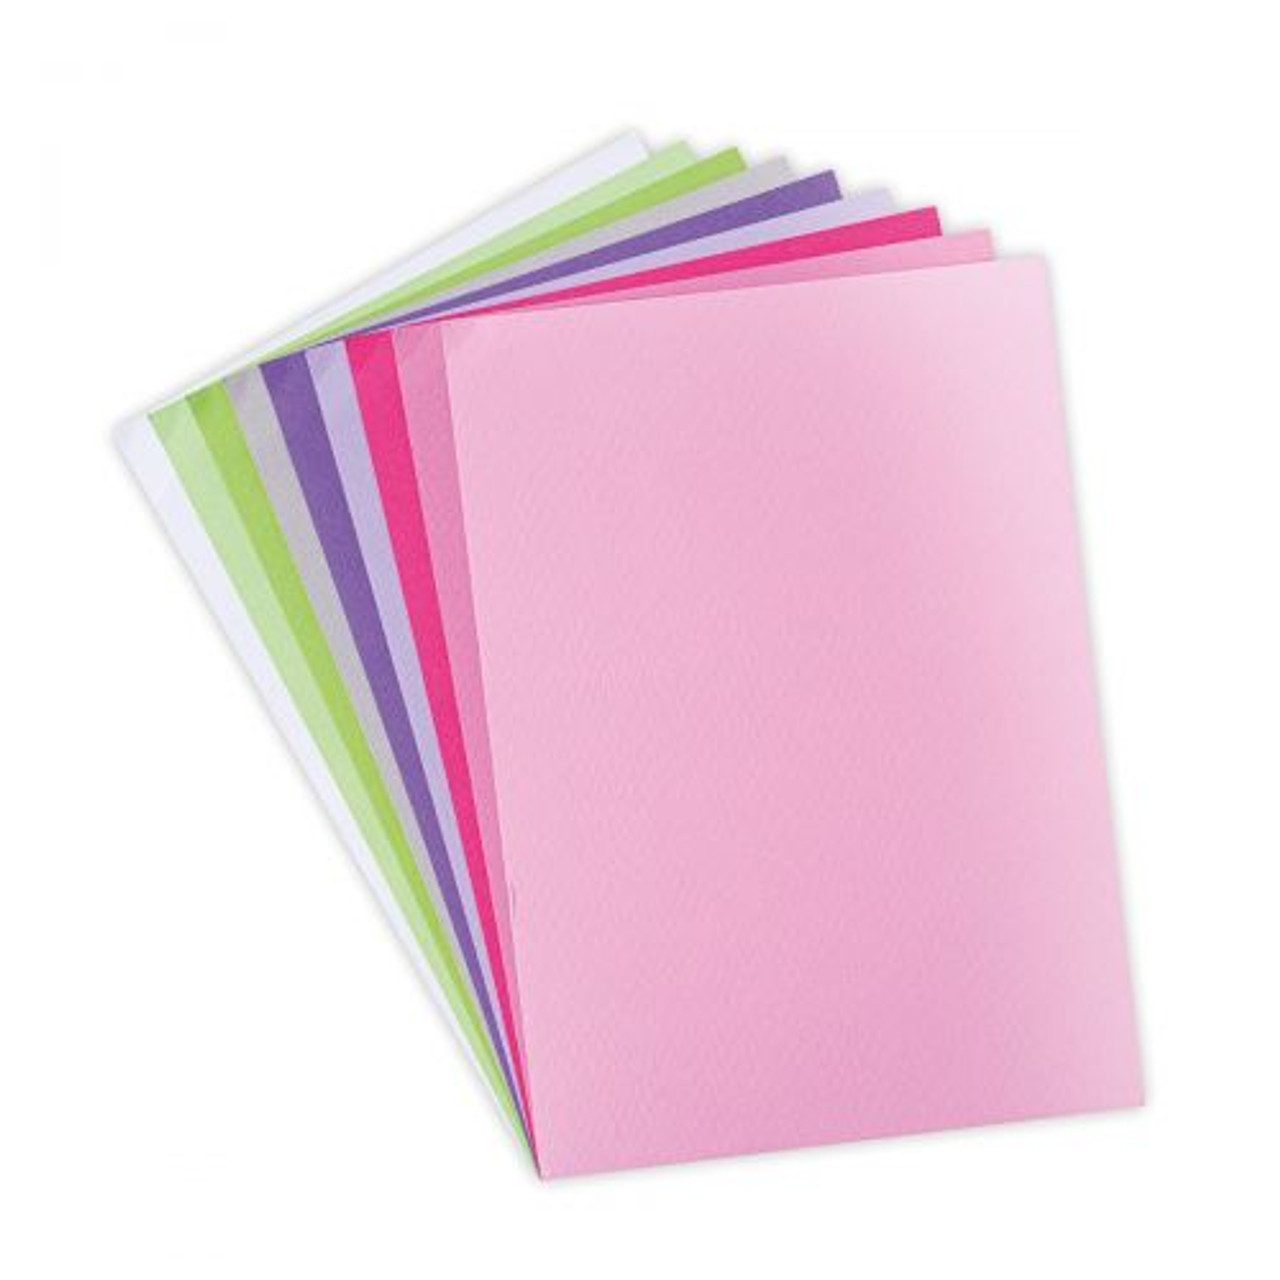 Sizzix Surfacez - Cardstock, 8 1/4 x 11 3/4, 20 Assorted Colors